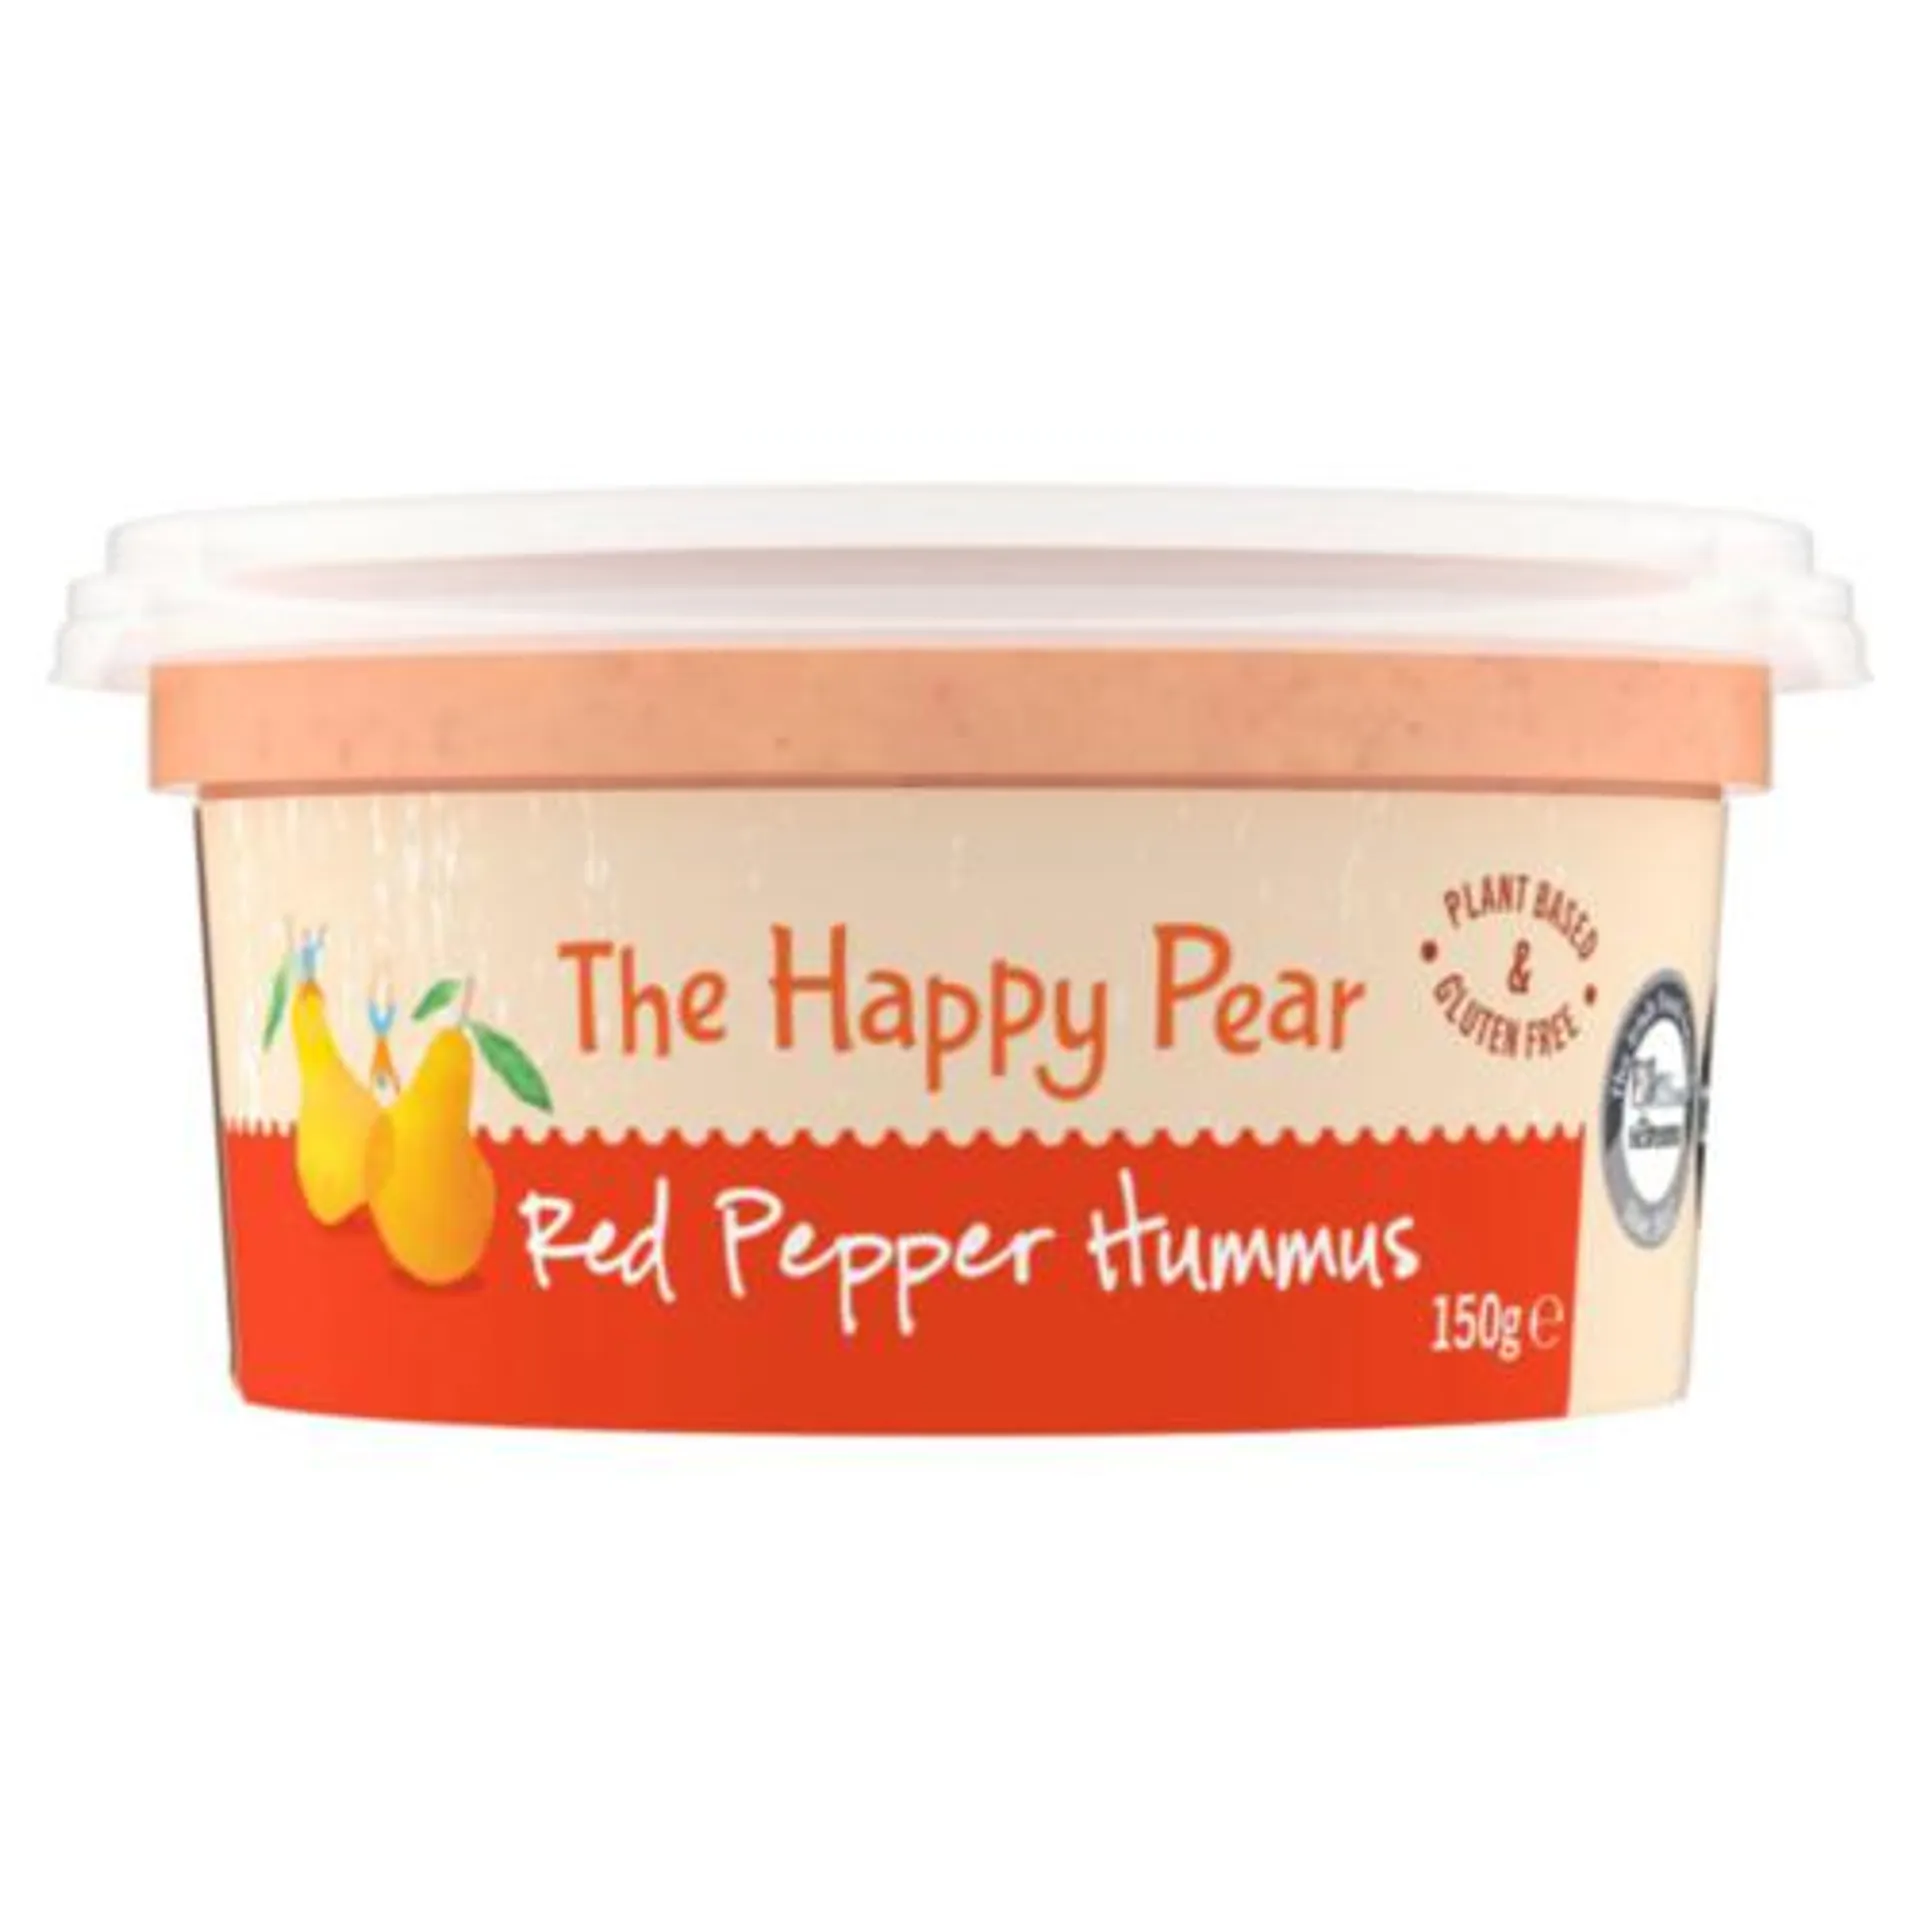 The Happy Pear Red Pepper Hummus